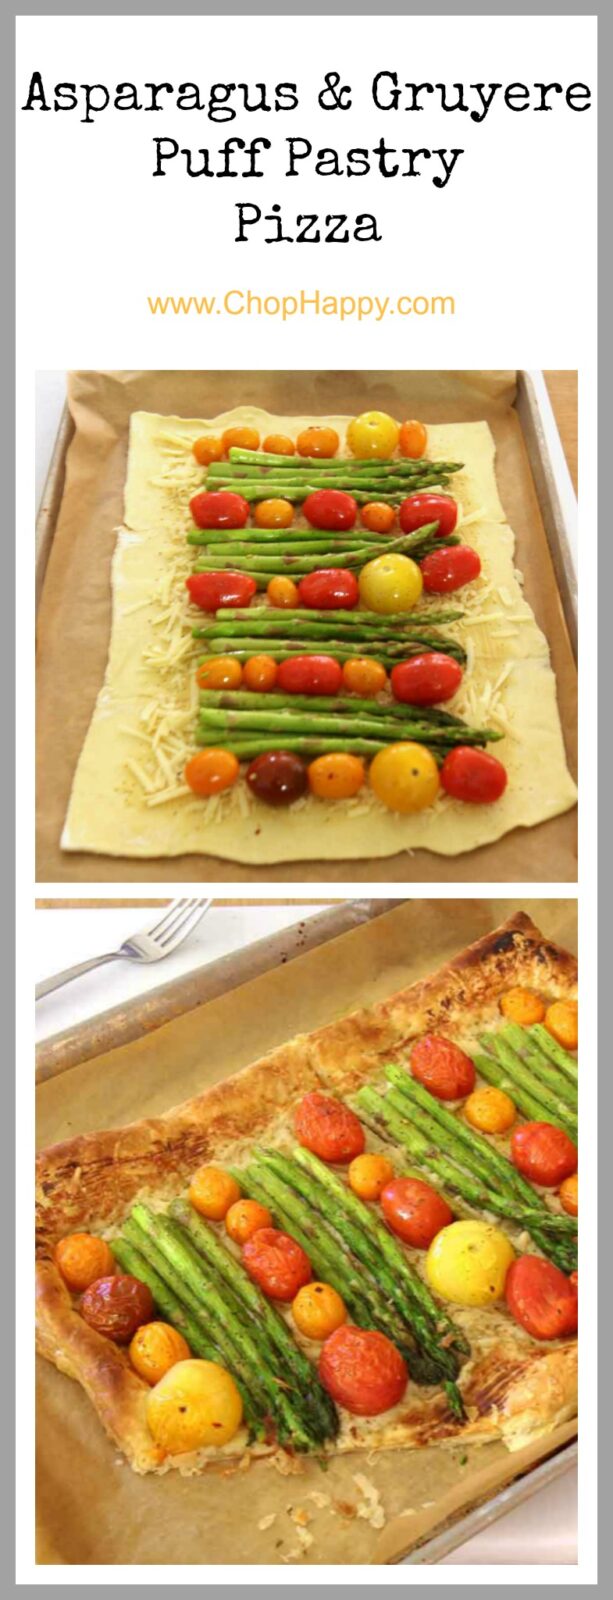 Asparagus and Gruyere Puff Pastry Pizza Recipe - is flaky, cheesy, and amazing comfort food smiles. Grab puff pastry, tomatoes, cheese, and fun spices for this easy recipe. www.ChopHappy.com #pizza #appetizer